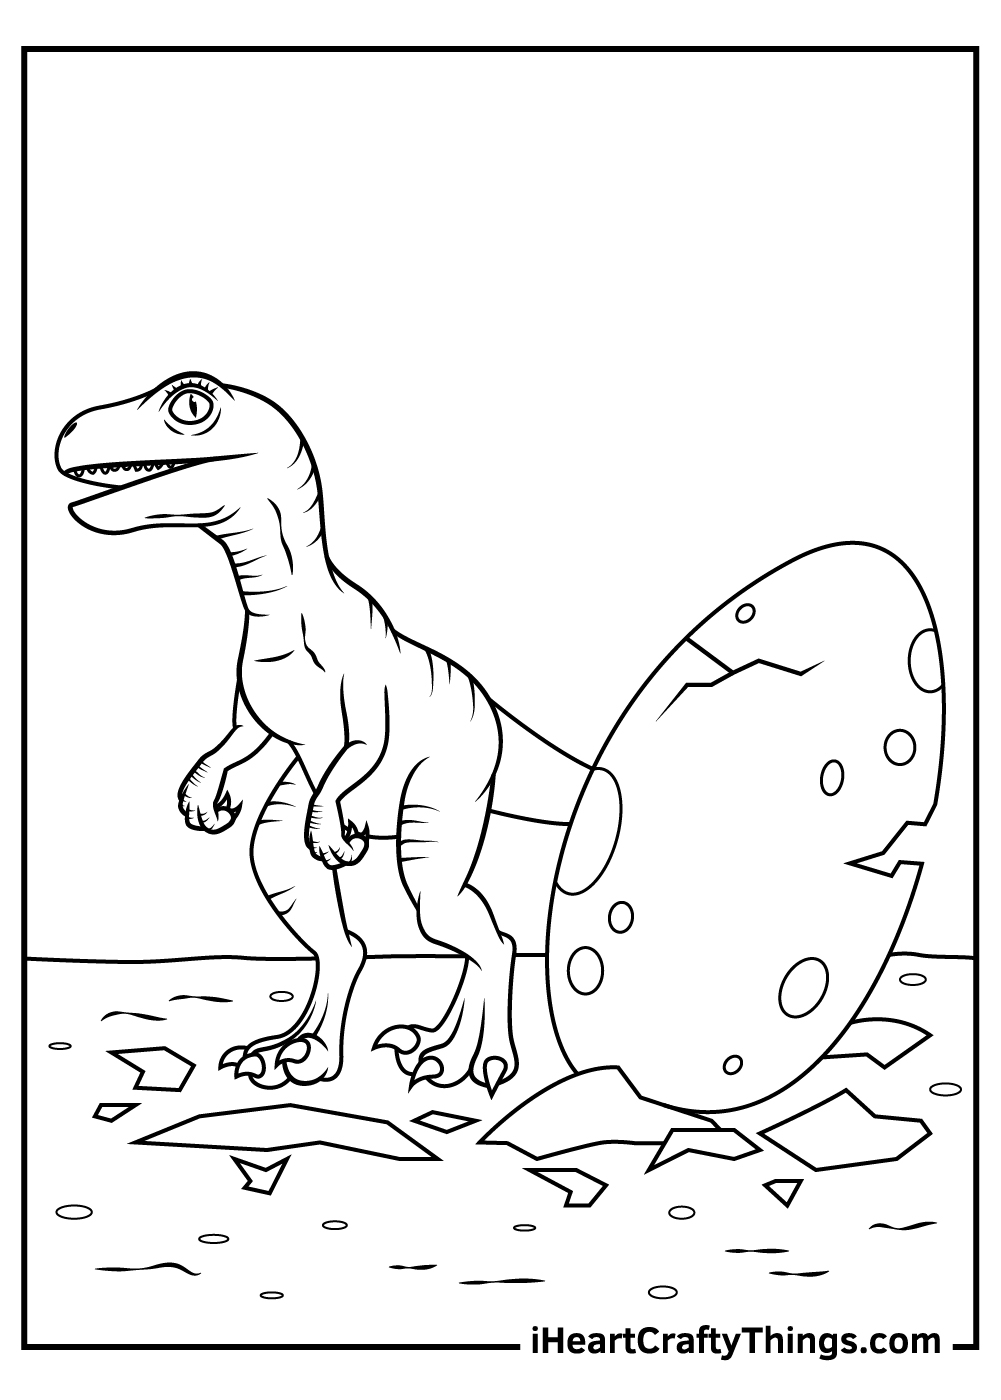 Printable Jurassic Park Coloring Pages Updated 20